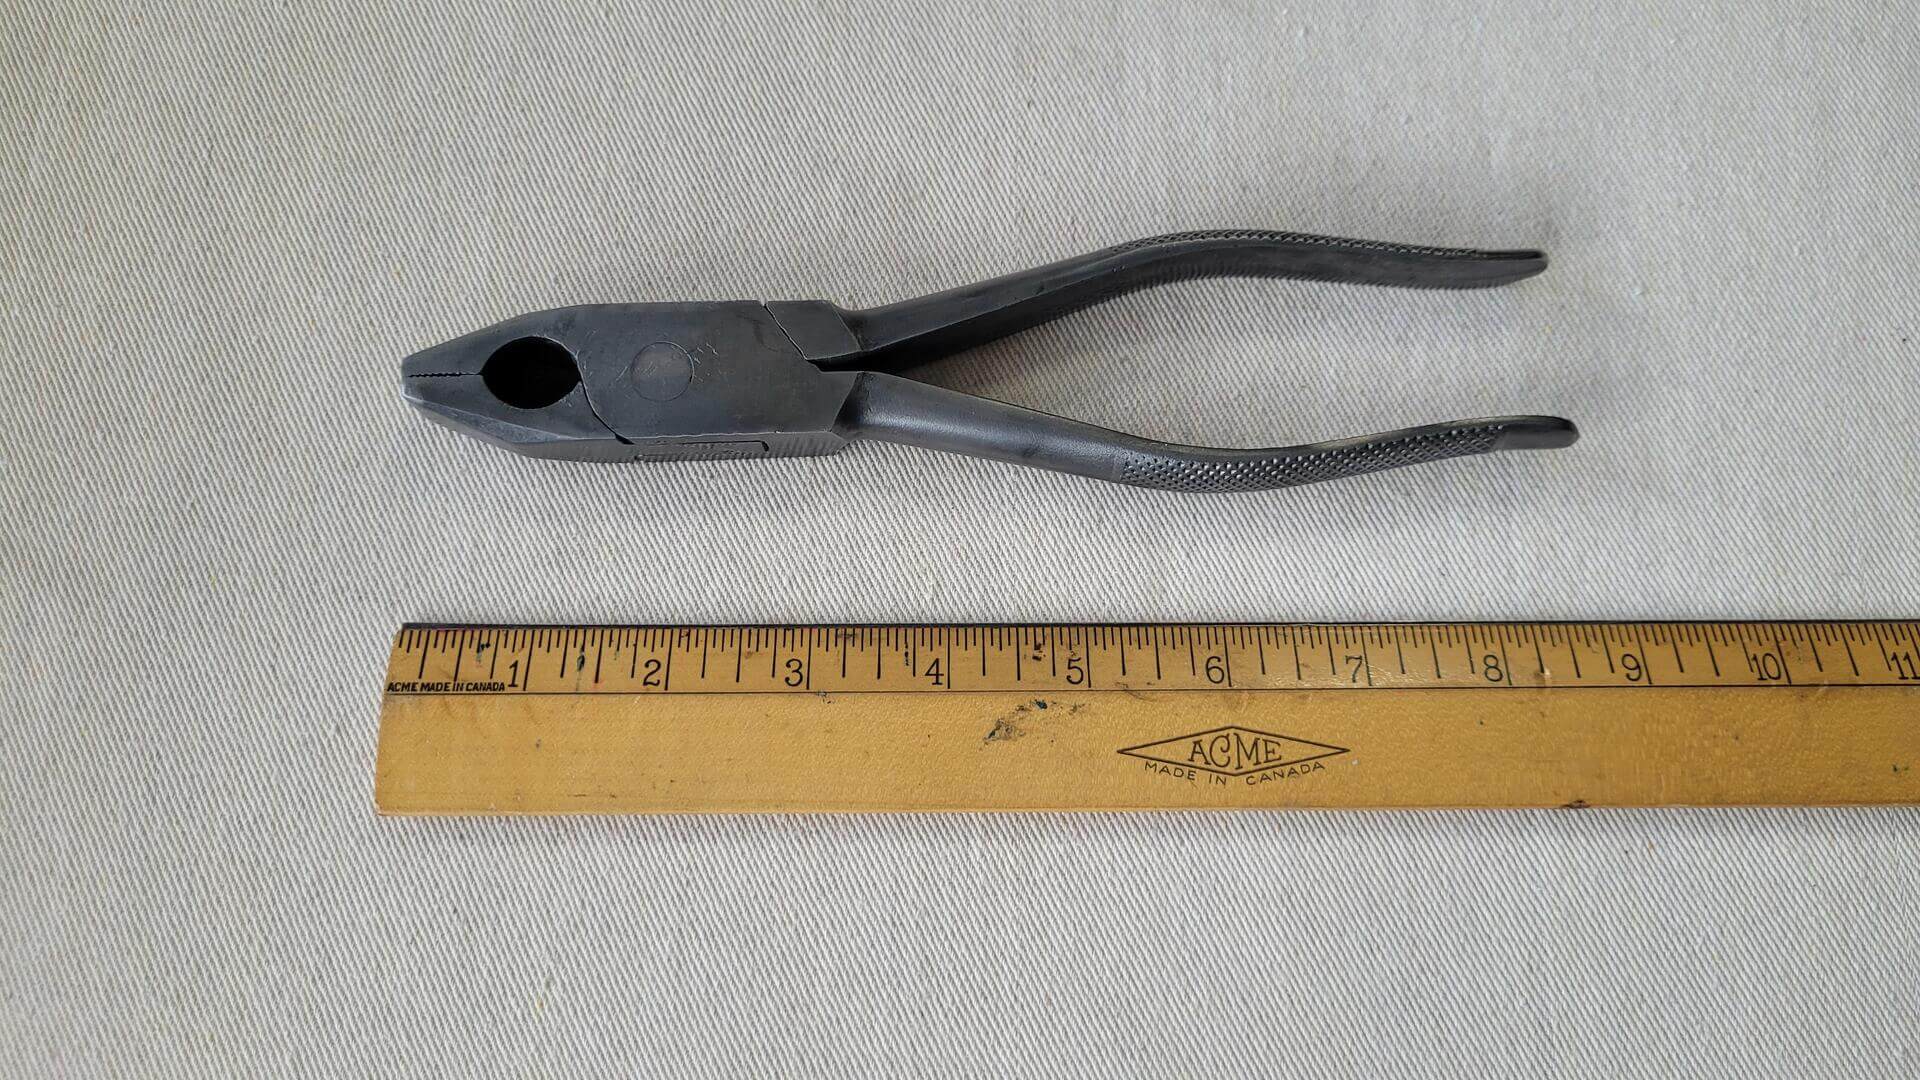 Antique Utica Tools No. 2050 8 inch Box-Joint lineman pliers with side cutters and knurled checkered handles. Vintage made in USA collectible drop forge hand tools